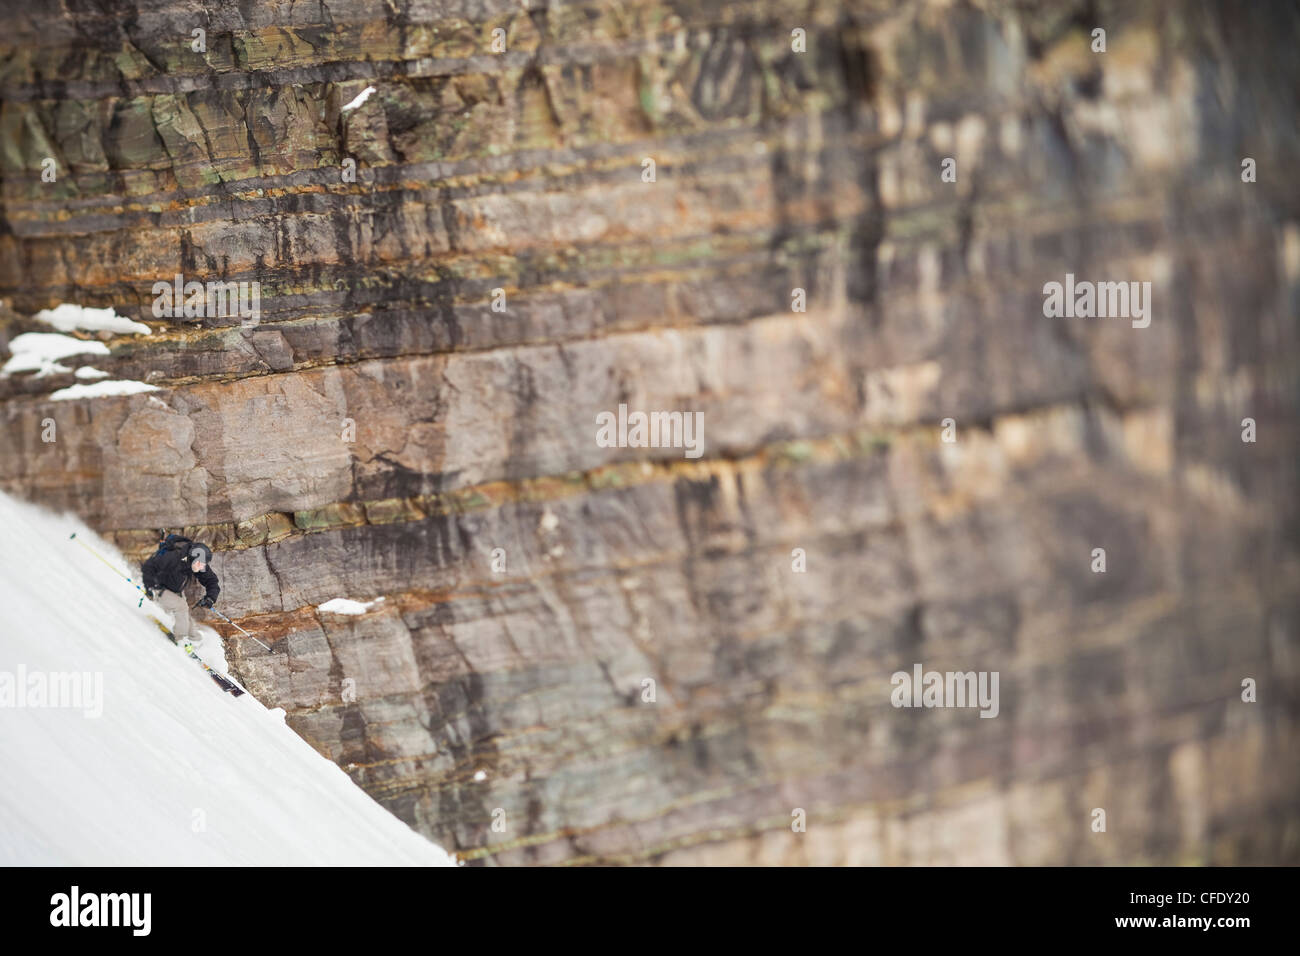 A male backcountry skier descends 3/4 Couloir in spring time conditions, Moraine Lake, Banff National Park, Alberta, Canada Stock Photo